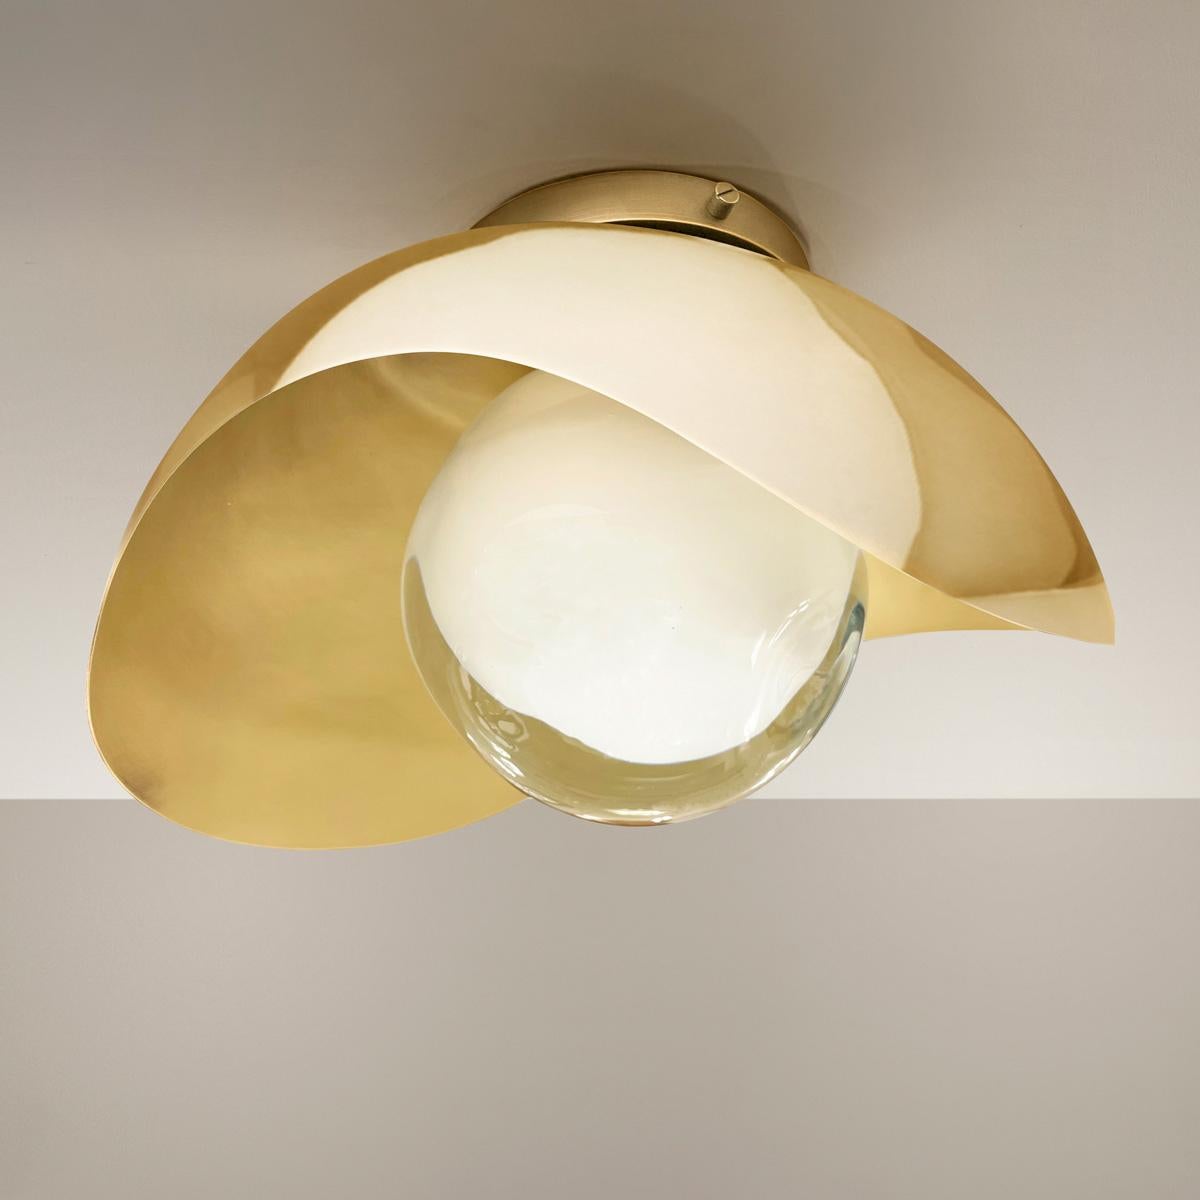 Perla Flushmount Ceiling Light by Gaspare Asaro-Brass Finish In New Condition For Sale In New York, NY